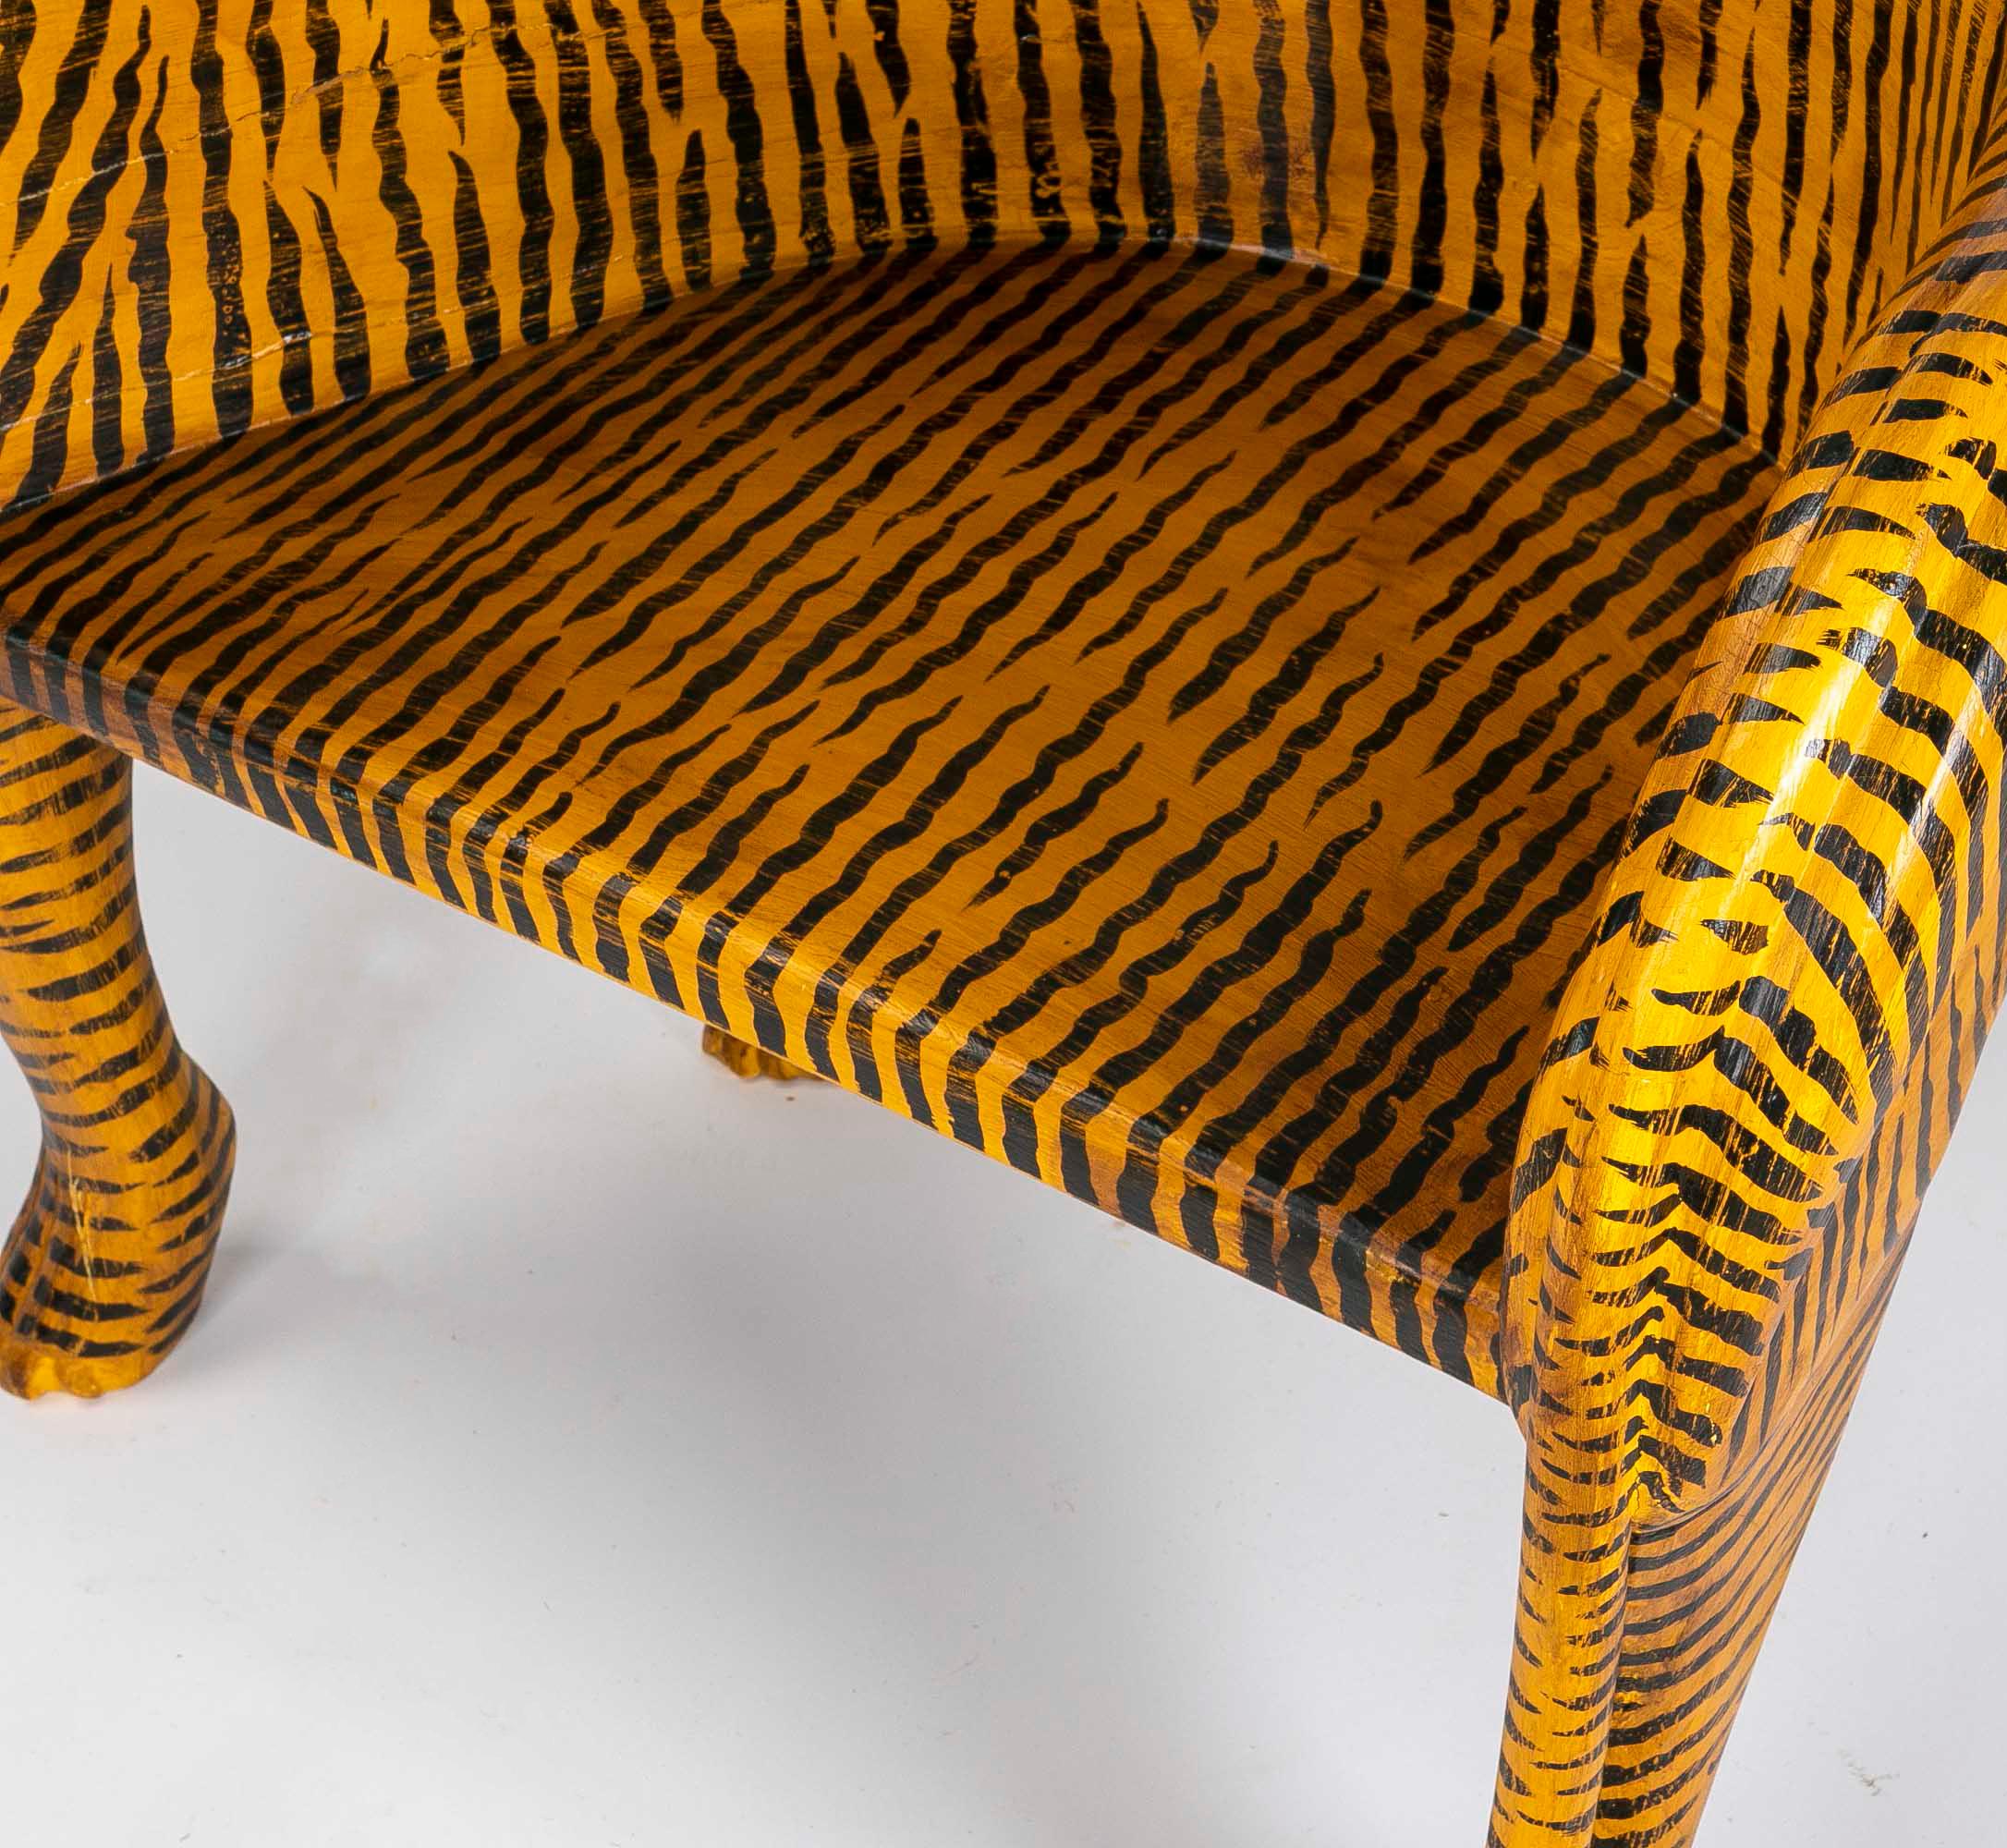 Hand-Painted Wooden Tiger Armchair 6